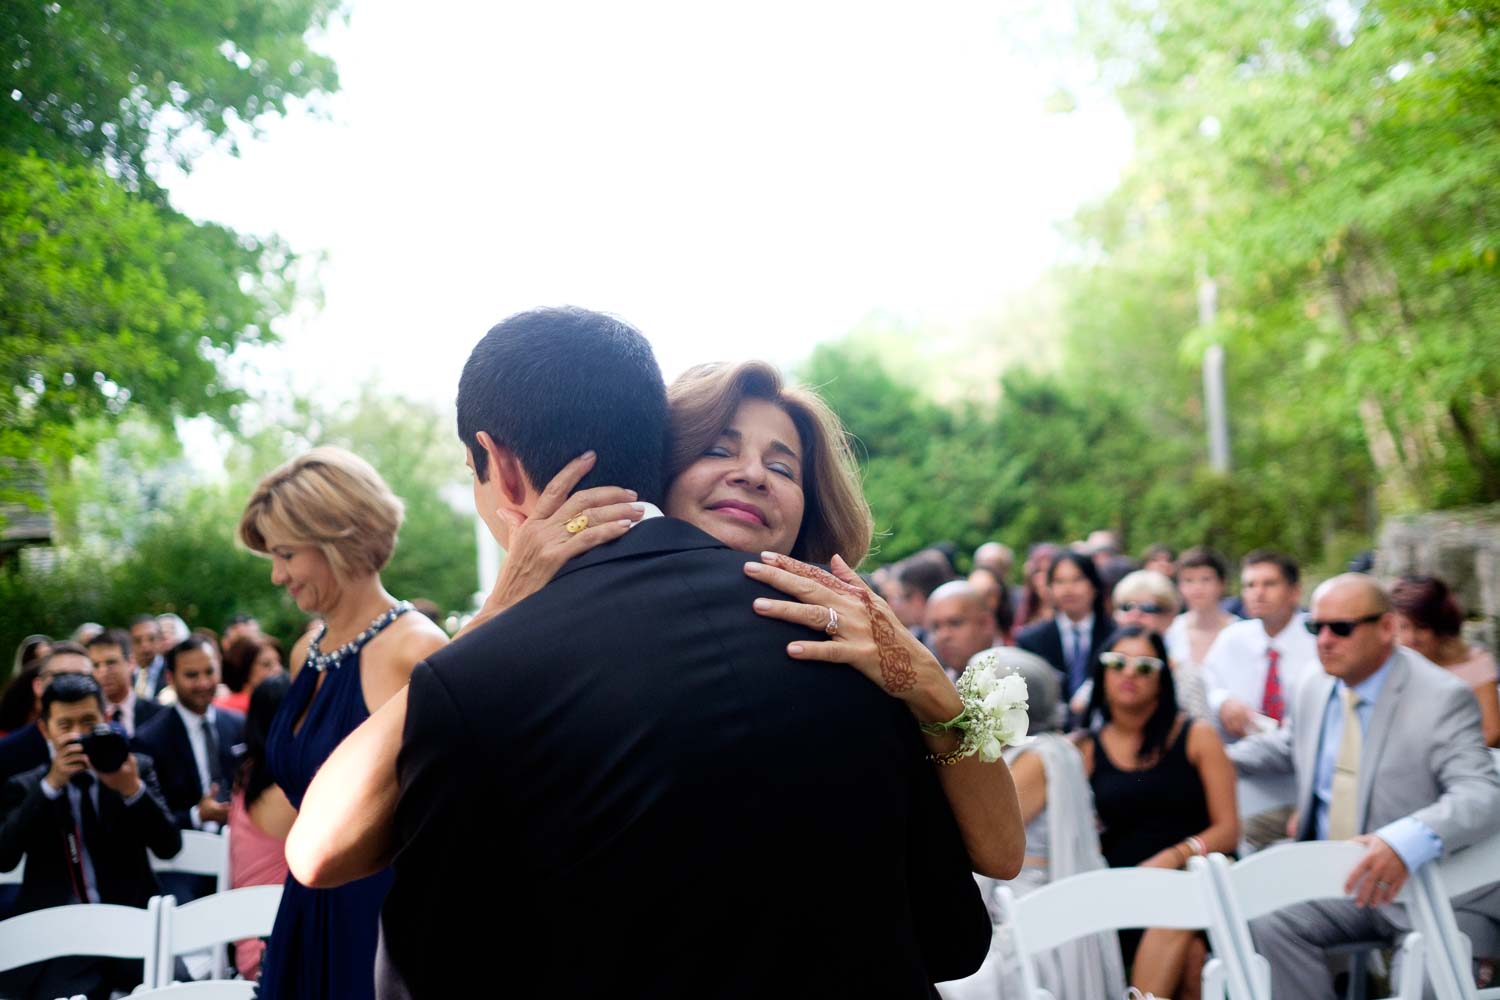  I'm a sucker for emotion in pictures so I live this one as Augusto's mom gives him one final hug before he marries Mashael during their outdoor wedding ceremony at Ancaster Mill. 